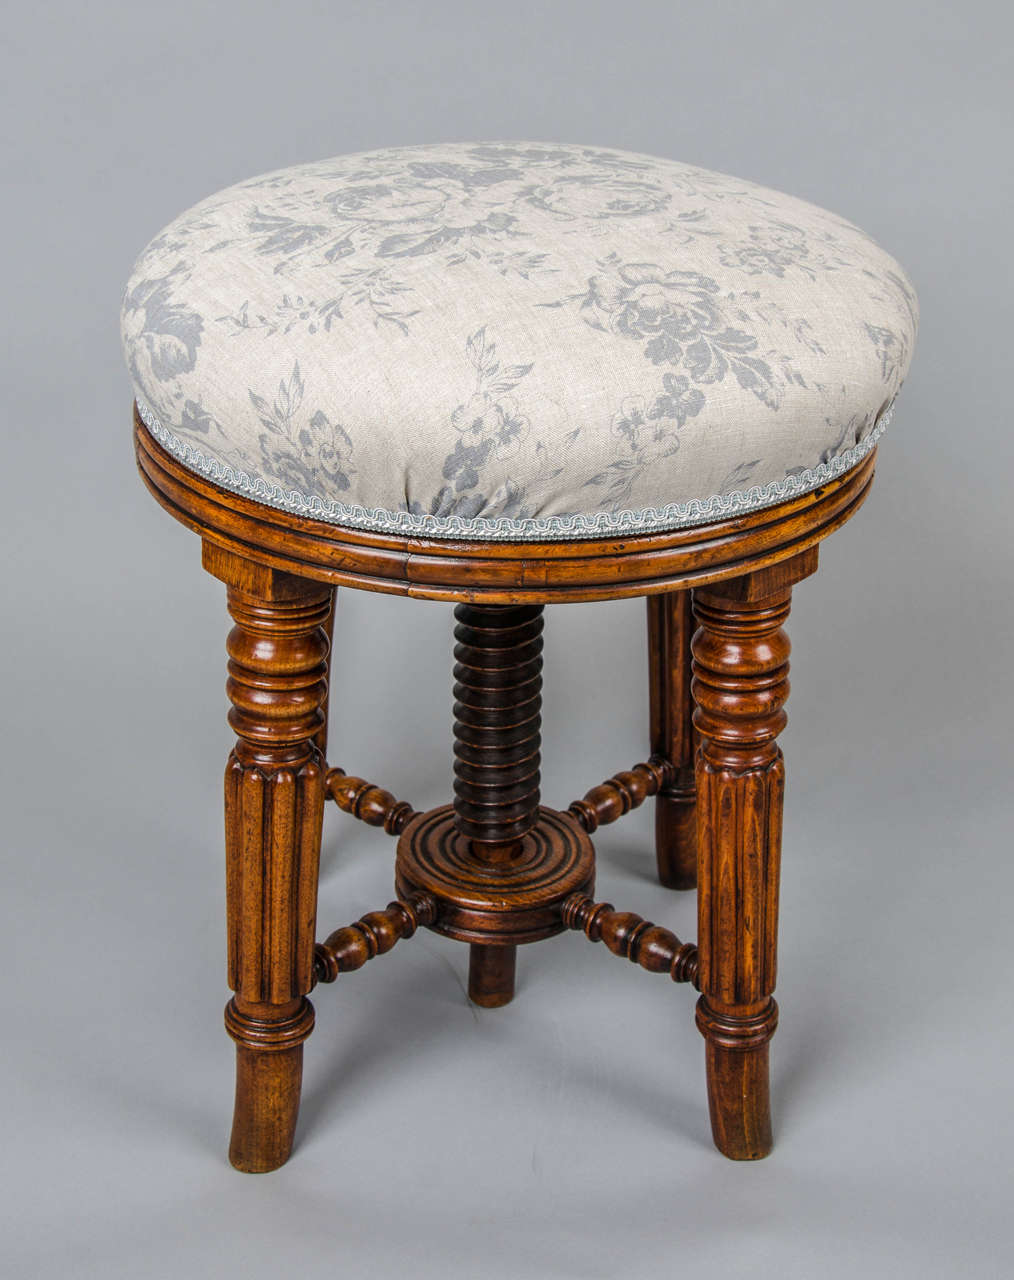 A good mid-19th century mahogany piano stool in the manner of Gillows, reupholstered in cabbages and roses fabric.